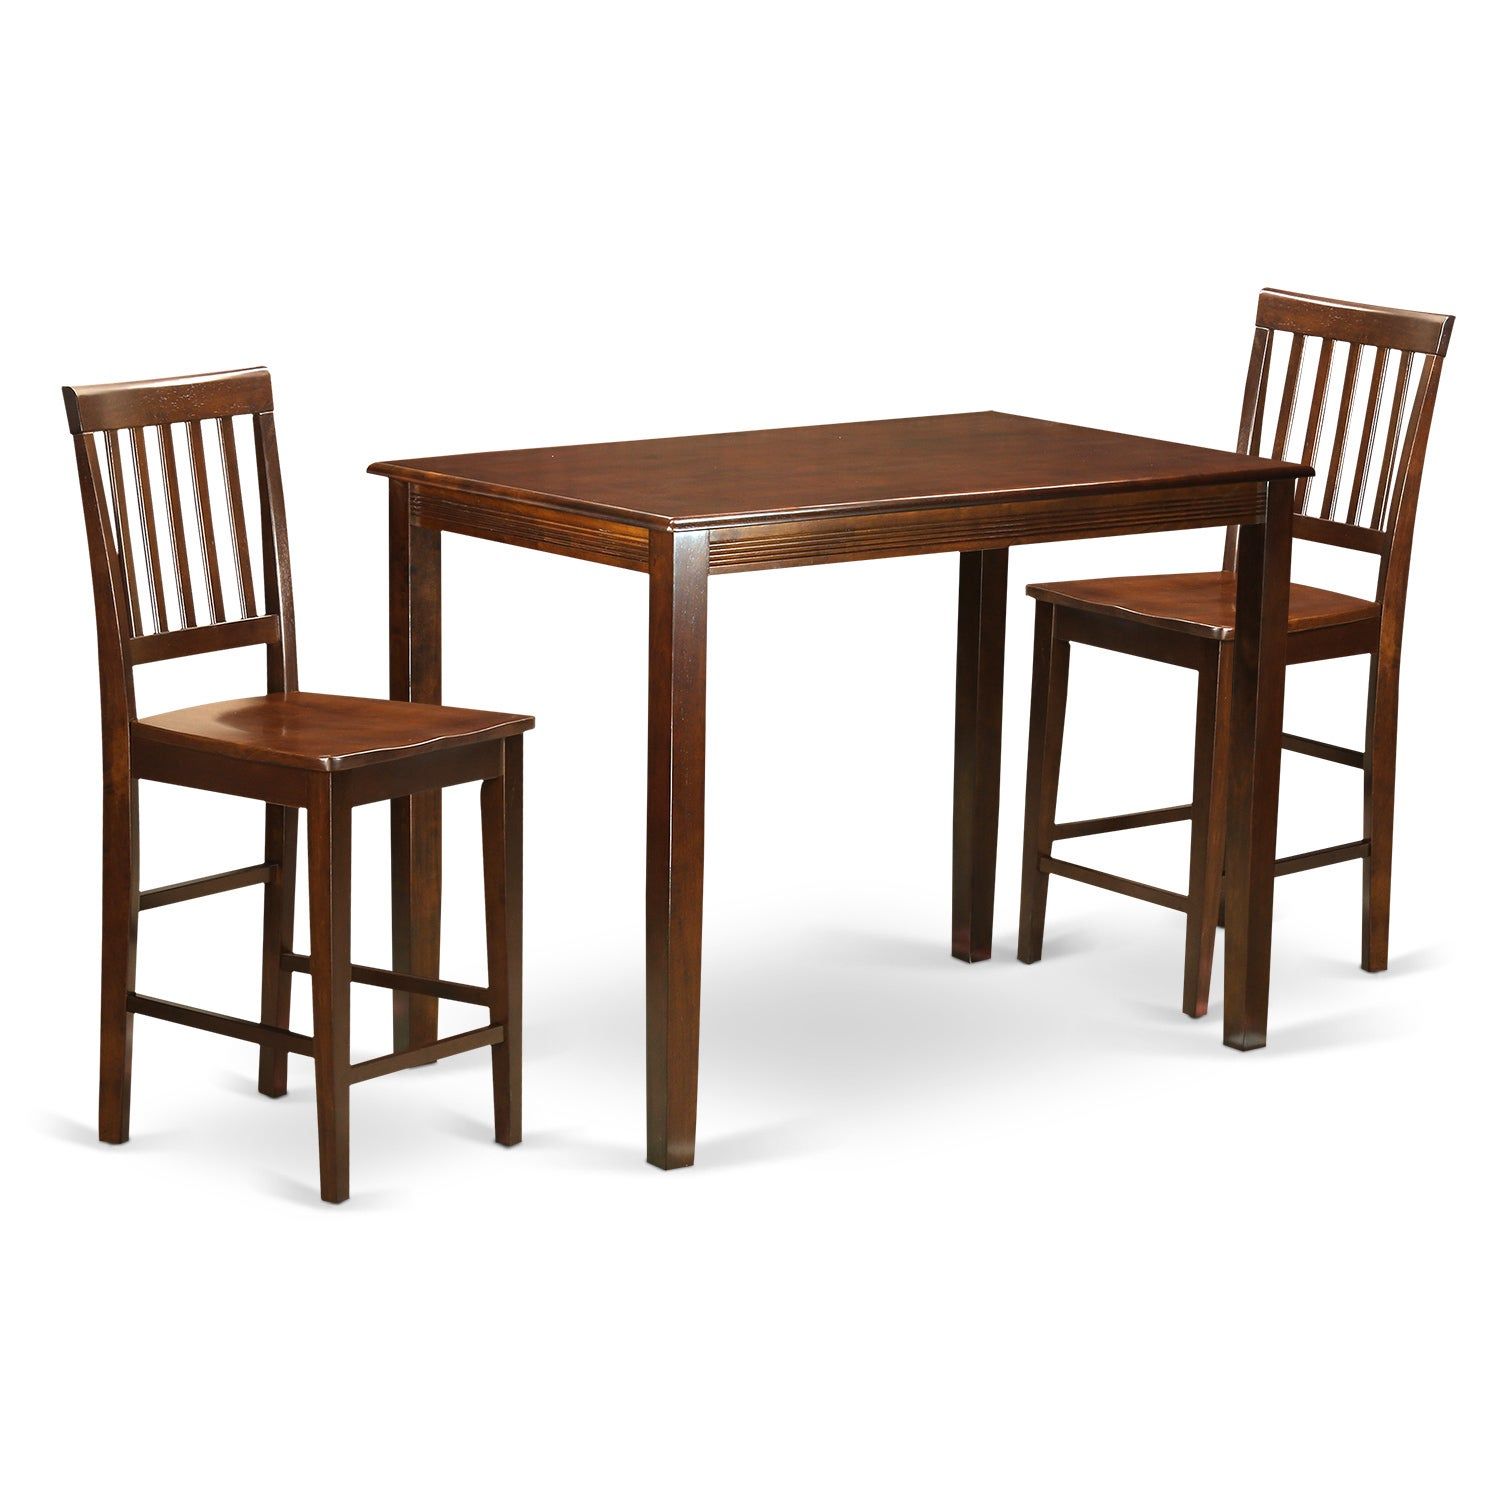 Most Popular Bettencourt 3 Piece Counter Height Dining Sets Intended For Natural Solid Wood 3 Piece Counter Height Dining Set (View 7 of 20)